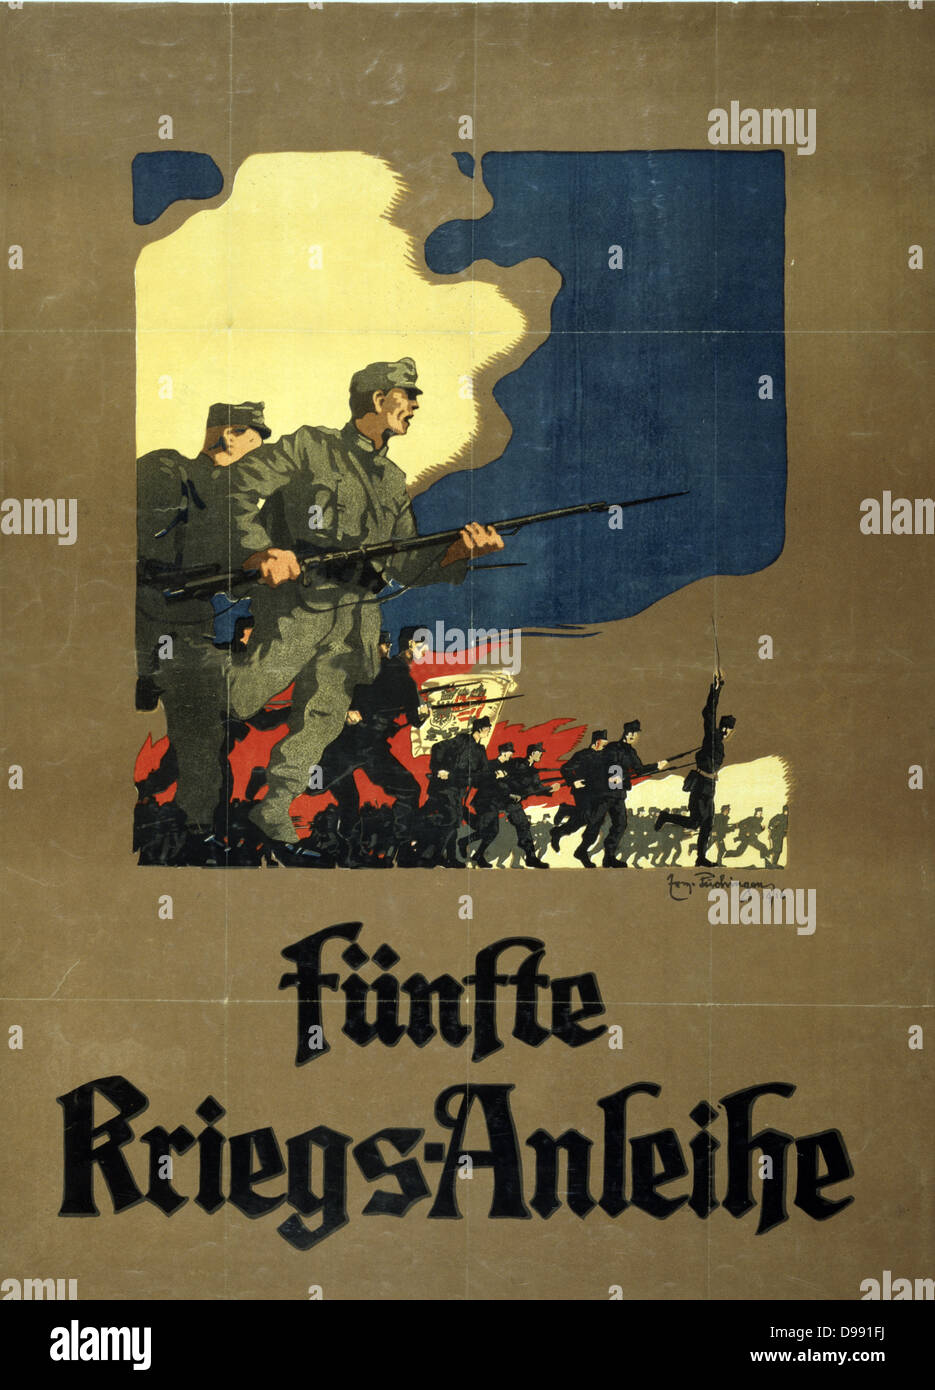 World War I 1914-1918: Fünfte Kriegs-Anleihe, 1916. Austrian poster for the issue of the Fifth War Loan to fund hostilities. Soldiers with rifles and fixed bayonets, charging. Government Finance Stock Photo